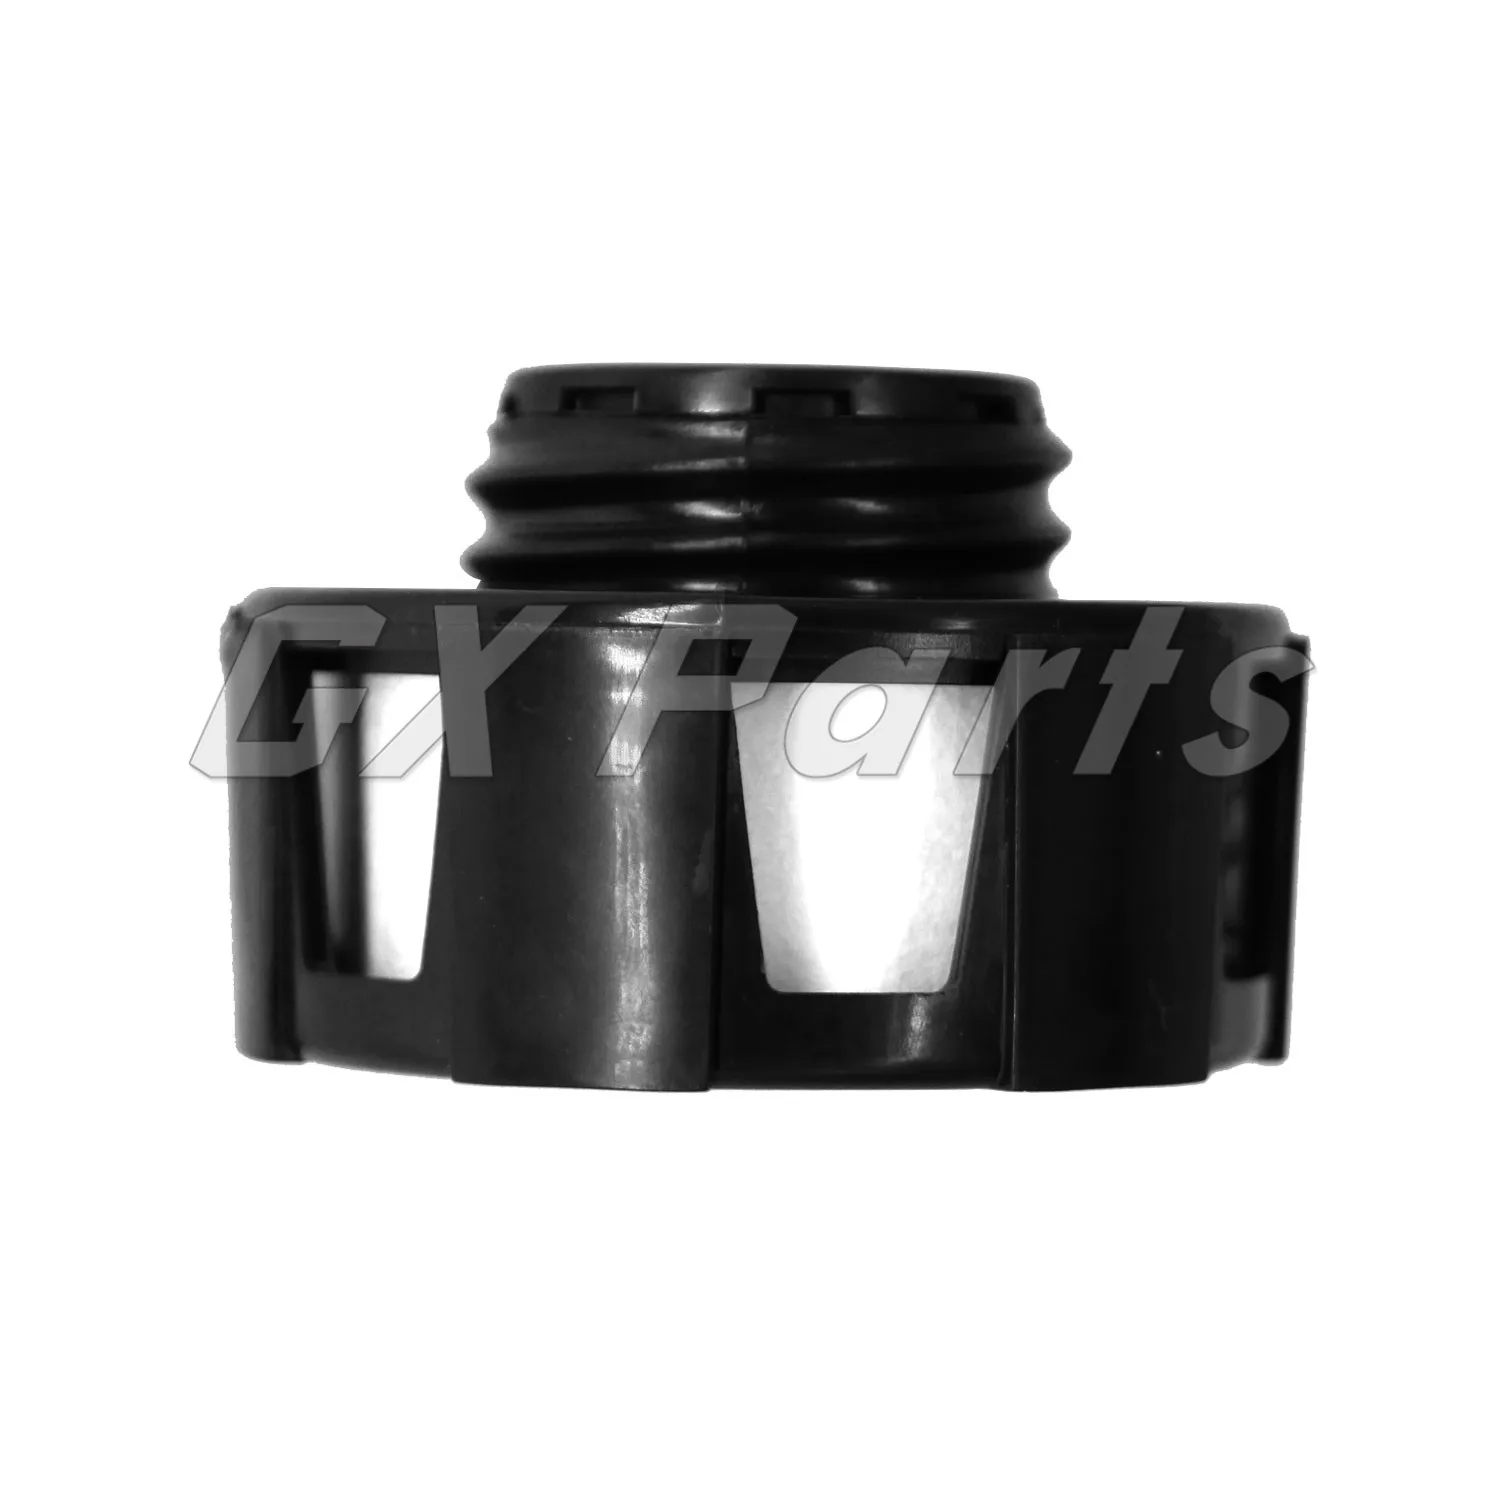 

6727475 Hydraulic Oil Vent Cap For Bobcat Skid Steer Loader S300 S450 S510 S530 S850 T110 T140 T200 T320 T550 T590 T630 T750